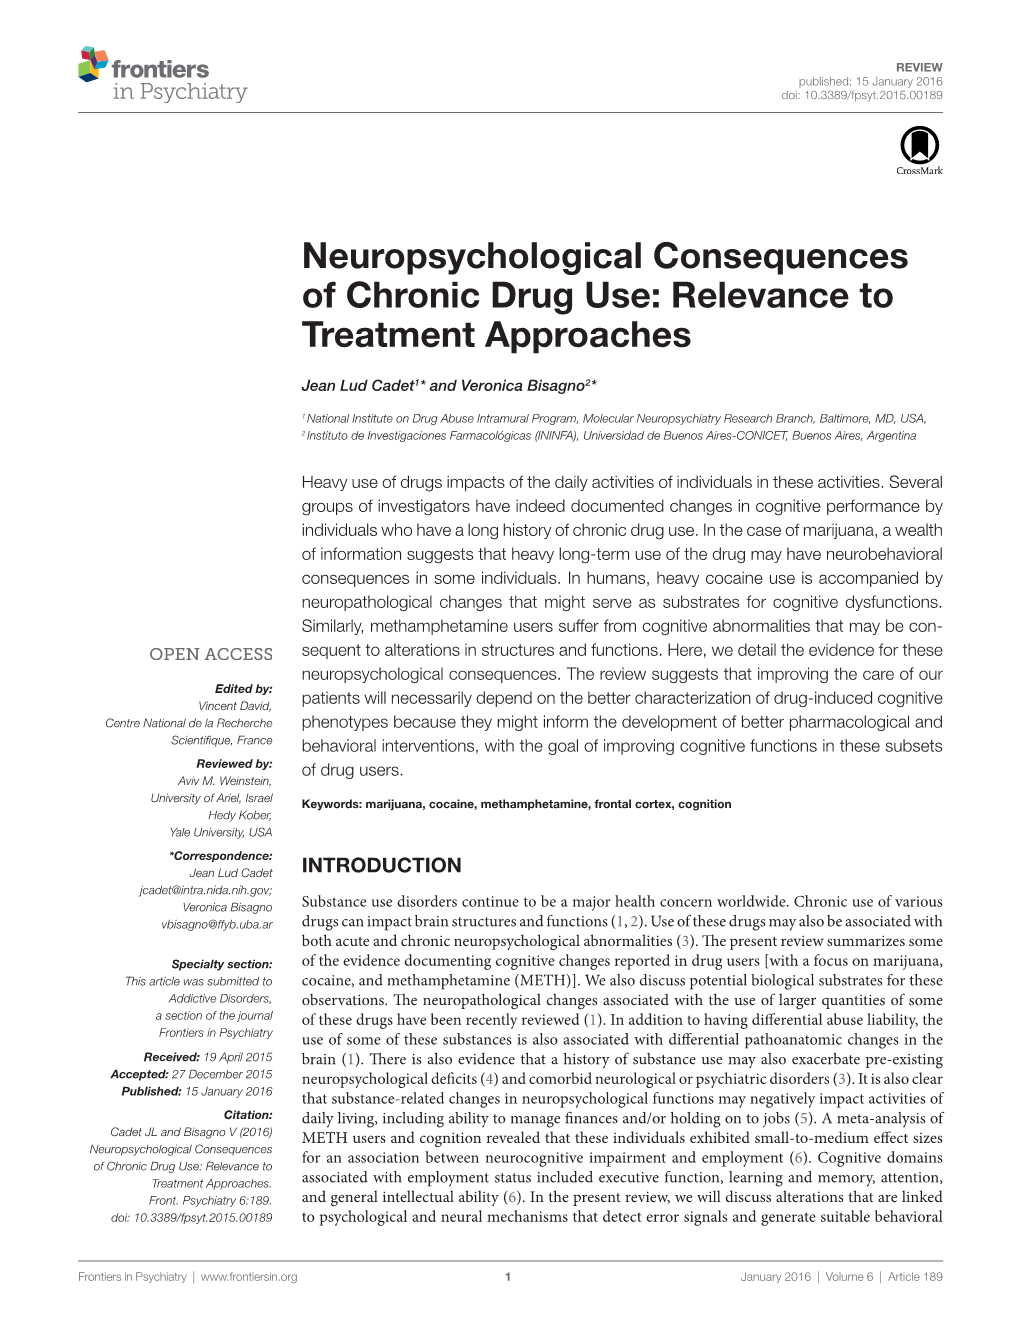 Neuropsychological Consequences of Chronic Drug Use: Relevance to Treatment Approaches